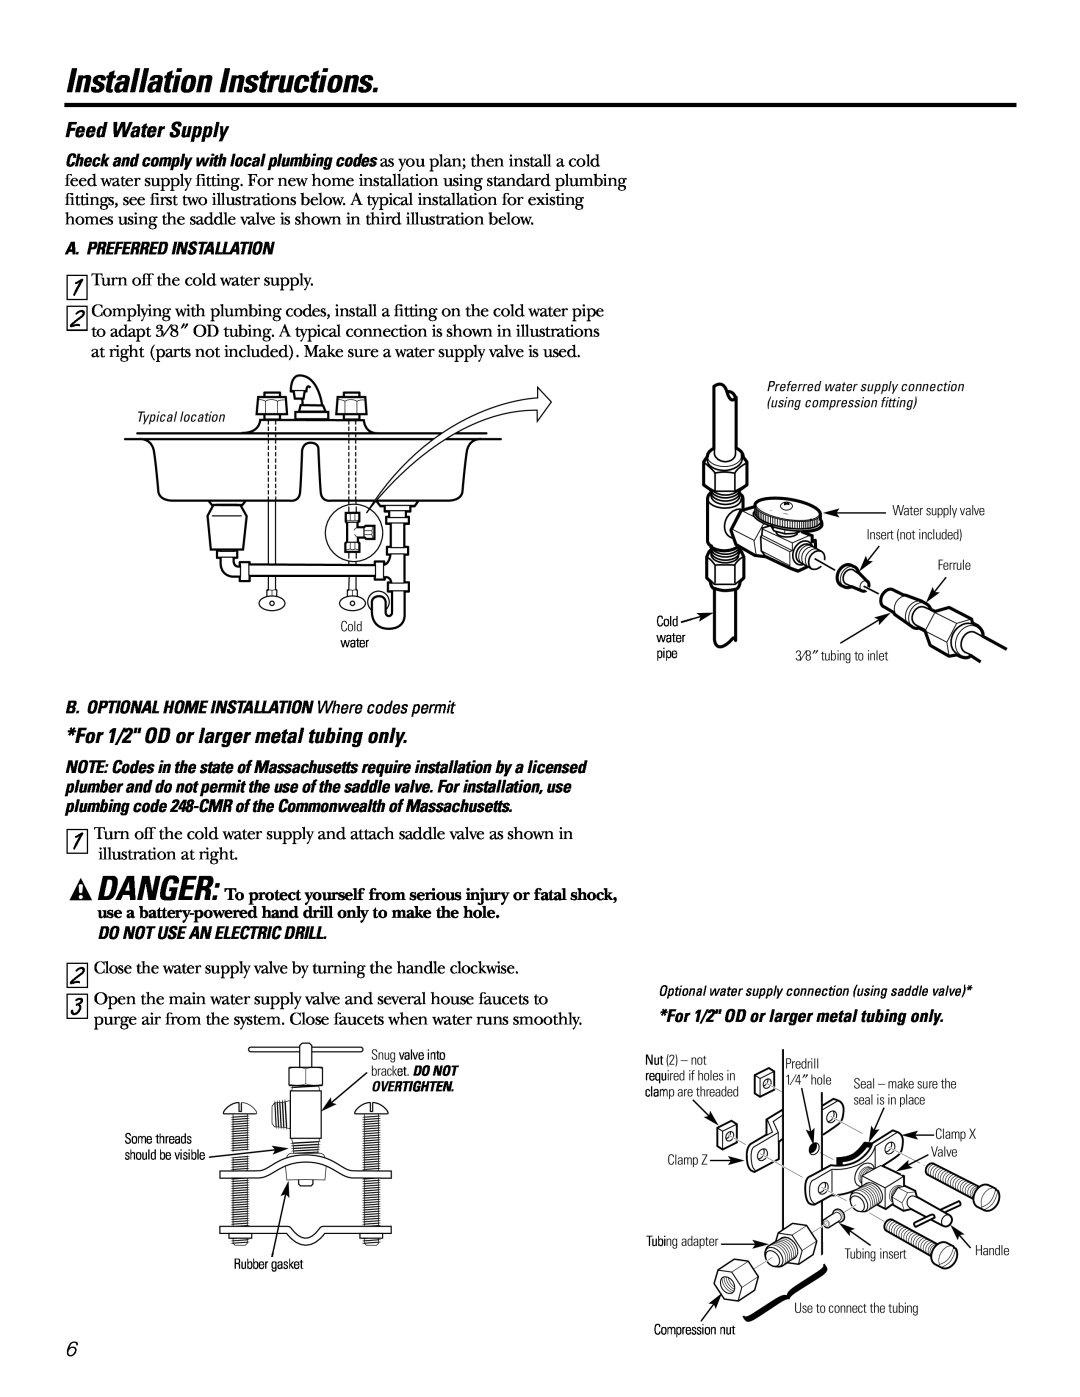 GE GXSL03C Feed Water Supply, For 1/2 OD or larger metal tubing only, A. Preferred Installation, Installation Instructions 